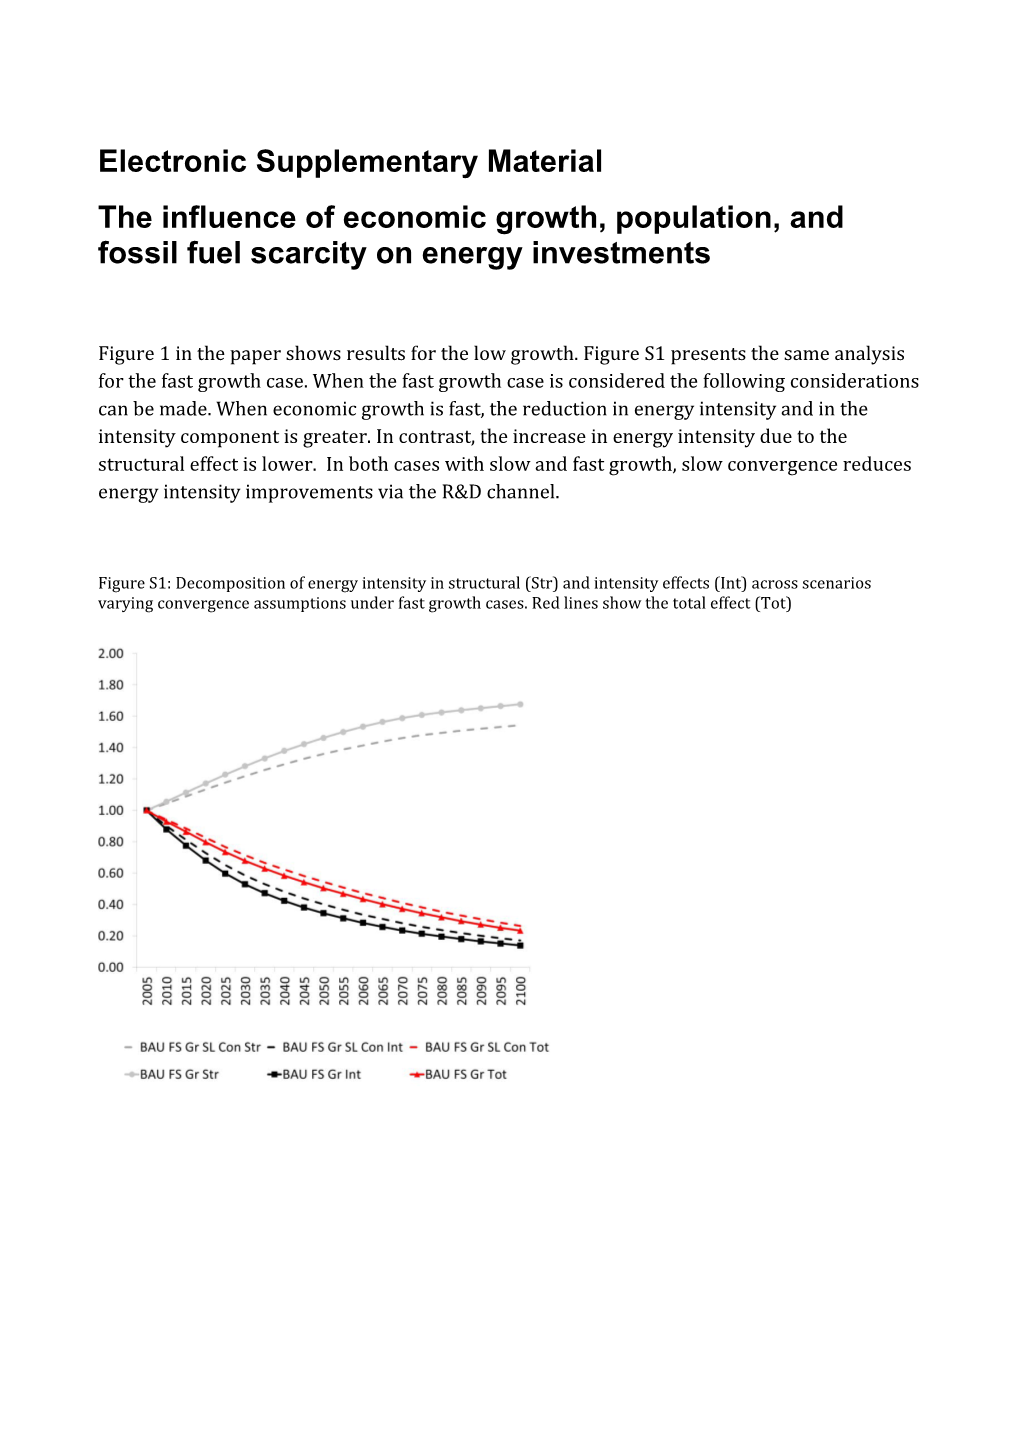 The Influence of Economic Growth, Population, and Fossil Fuel Scarcity on Energy Investments